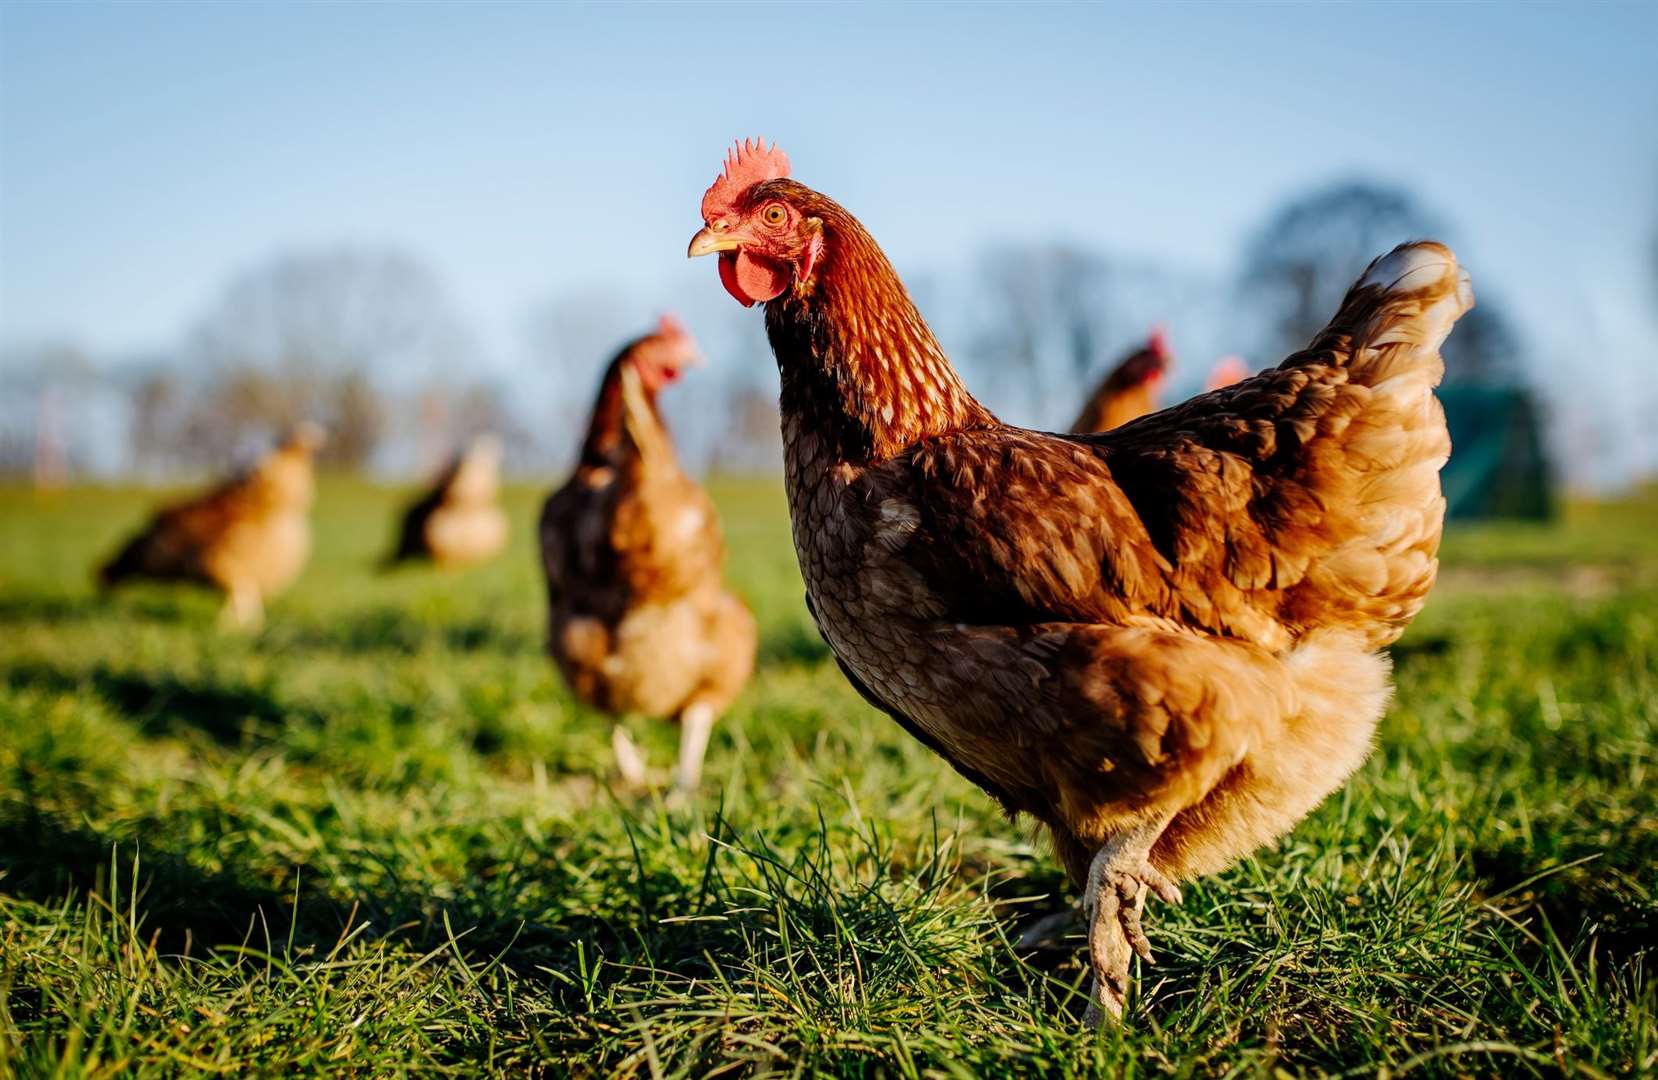 A flock of birds were culled after bid flu was found in commercial poultry. Picture: iStock